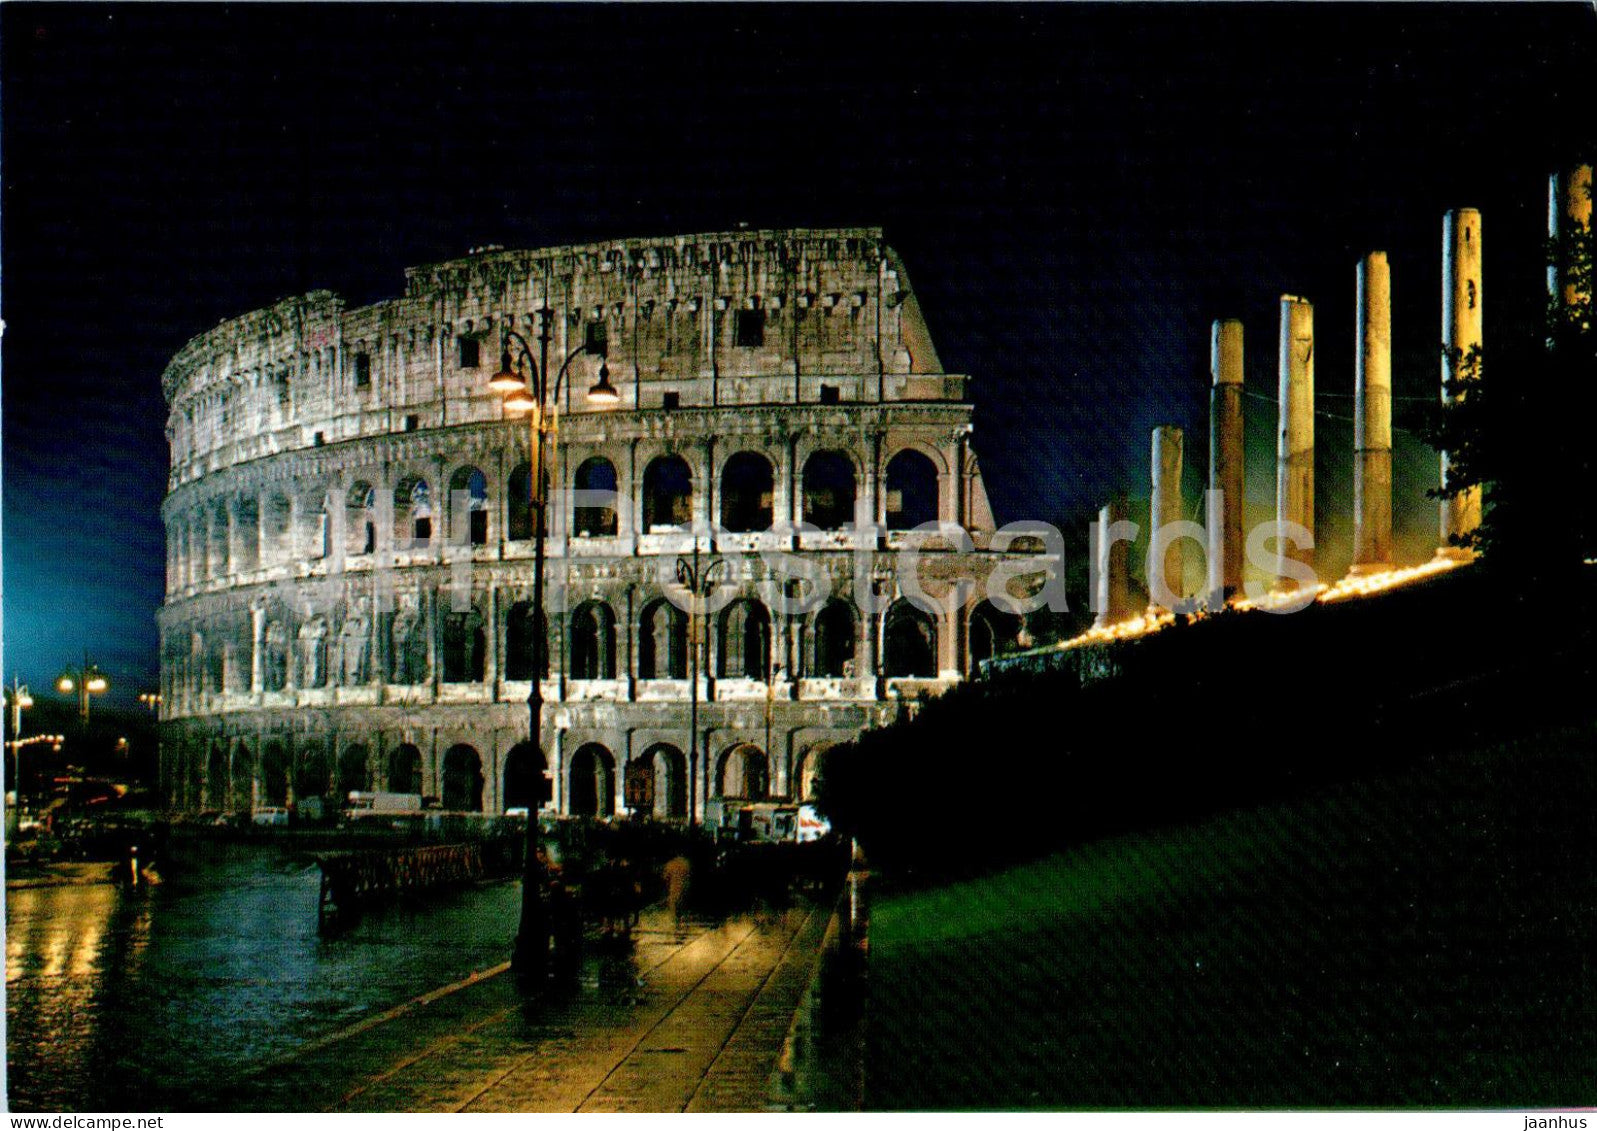 Roma - Rome - Il Colosseo - Colosseum - ancient world - 364 - Italy - unused - JH Postcards